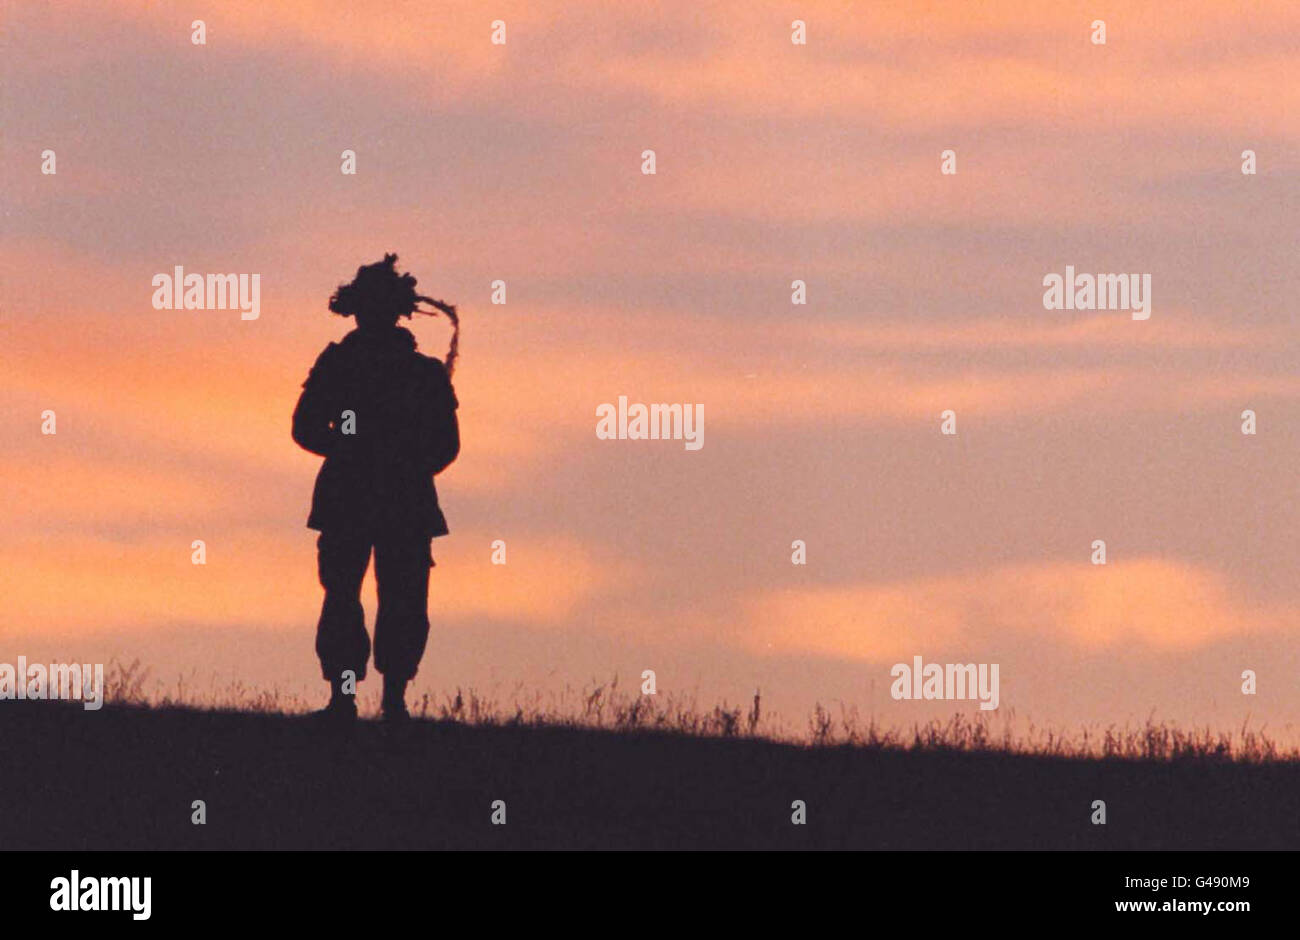 A lone soldier rises over a hill at dawn as part of the attack force in Exercise Medicine Man at BATUS in Canada yesterday (Tuesday). BATUS (British Army Training Unit Suffield) is the army's principal training ground for high intensity conflict, based near Medicine Hat, Alberta, Canada. Over 1000 troops take part in Exercise Medicine Man - a 22 day operation consisting 10 days live fire and 12 days Tactical Engagement Simulation using laser-firing weapons that register a 'kill' alert when a target is hit. Photo by Ben Curtis/PA. Stock Photo